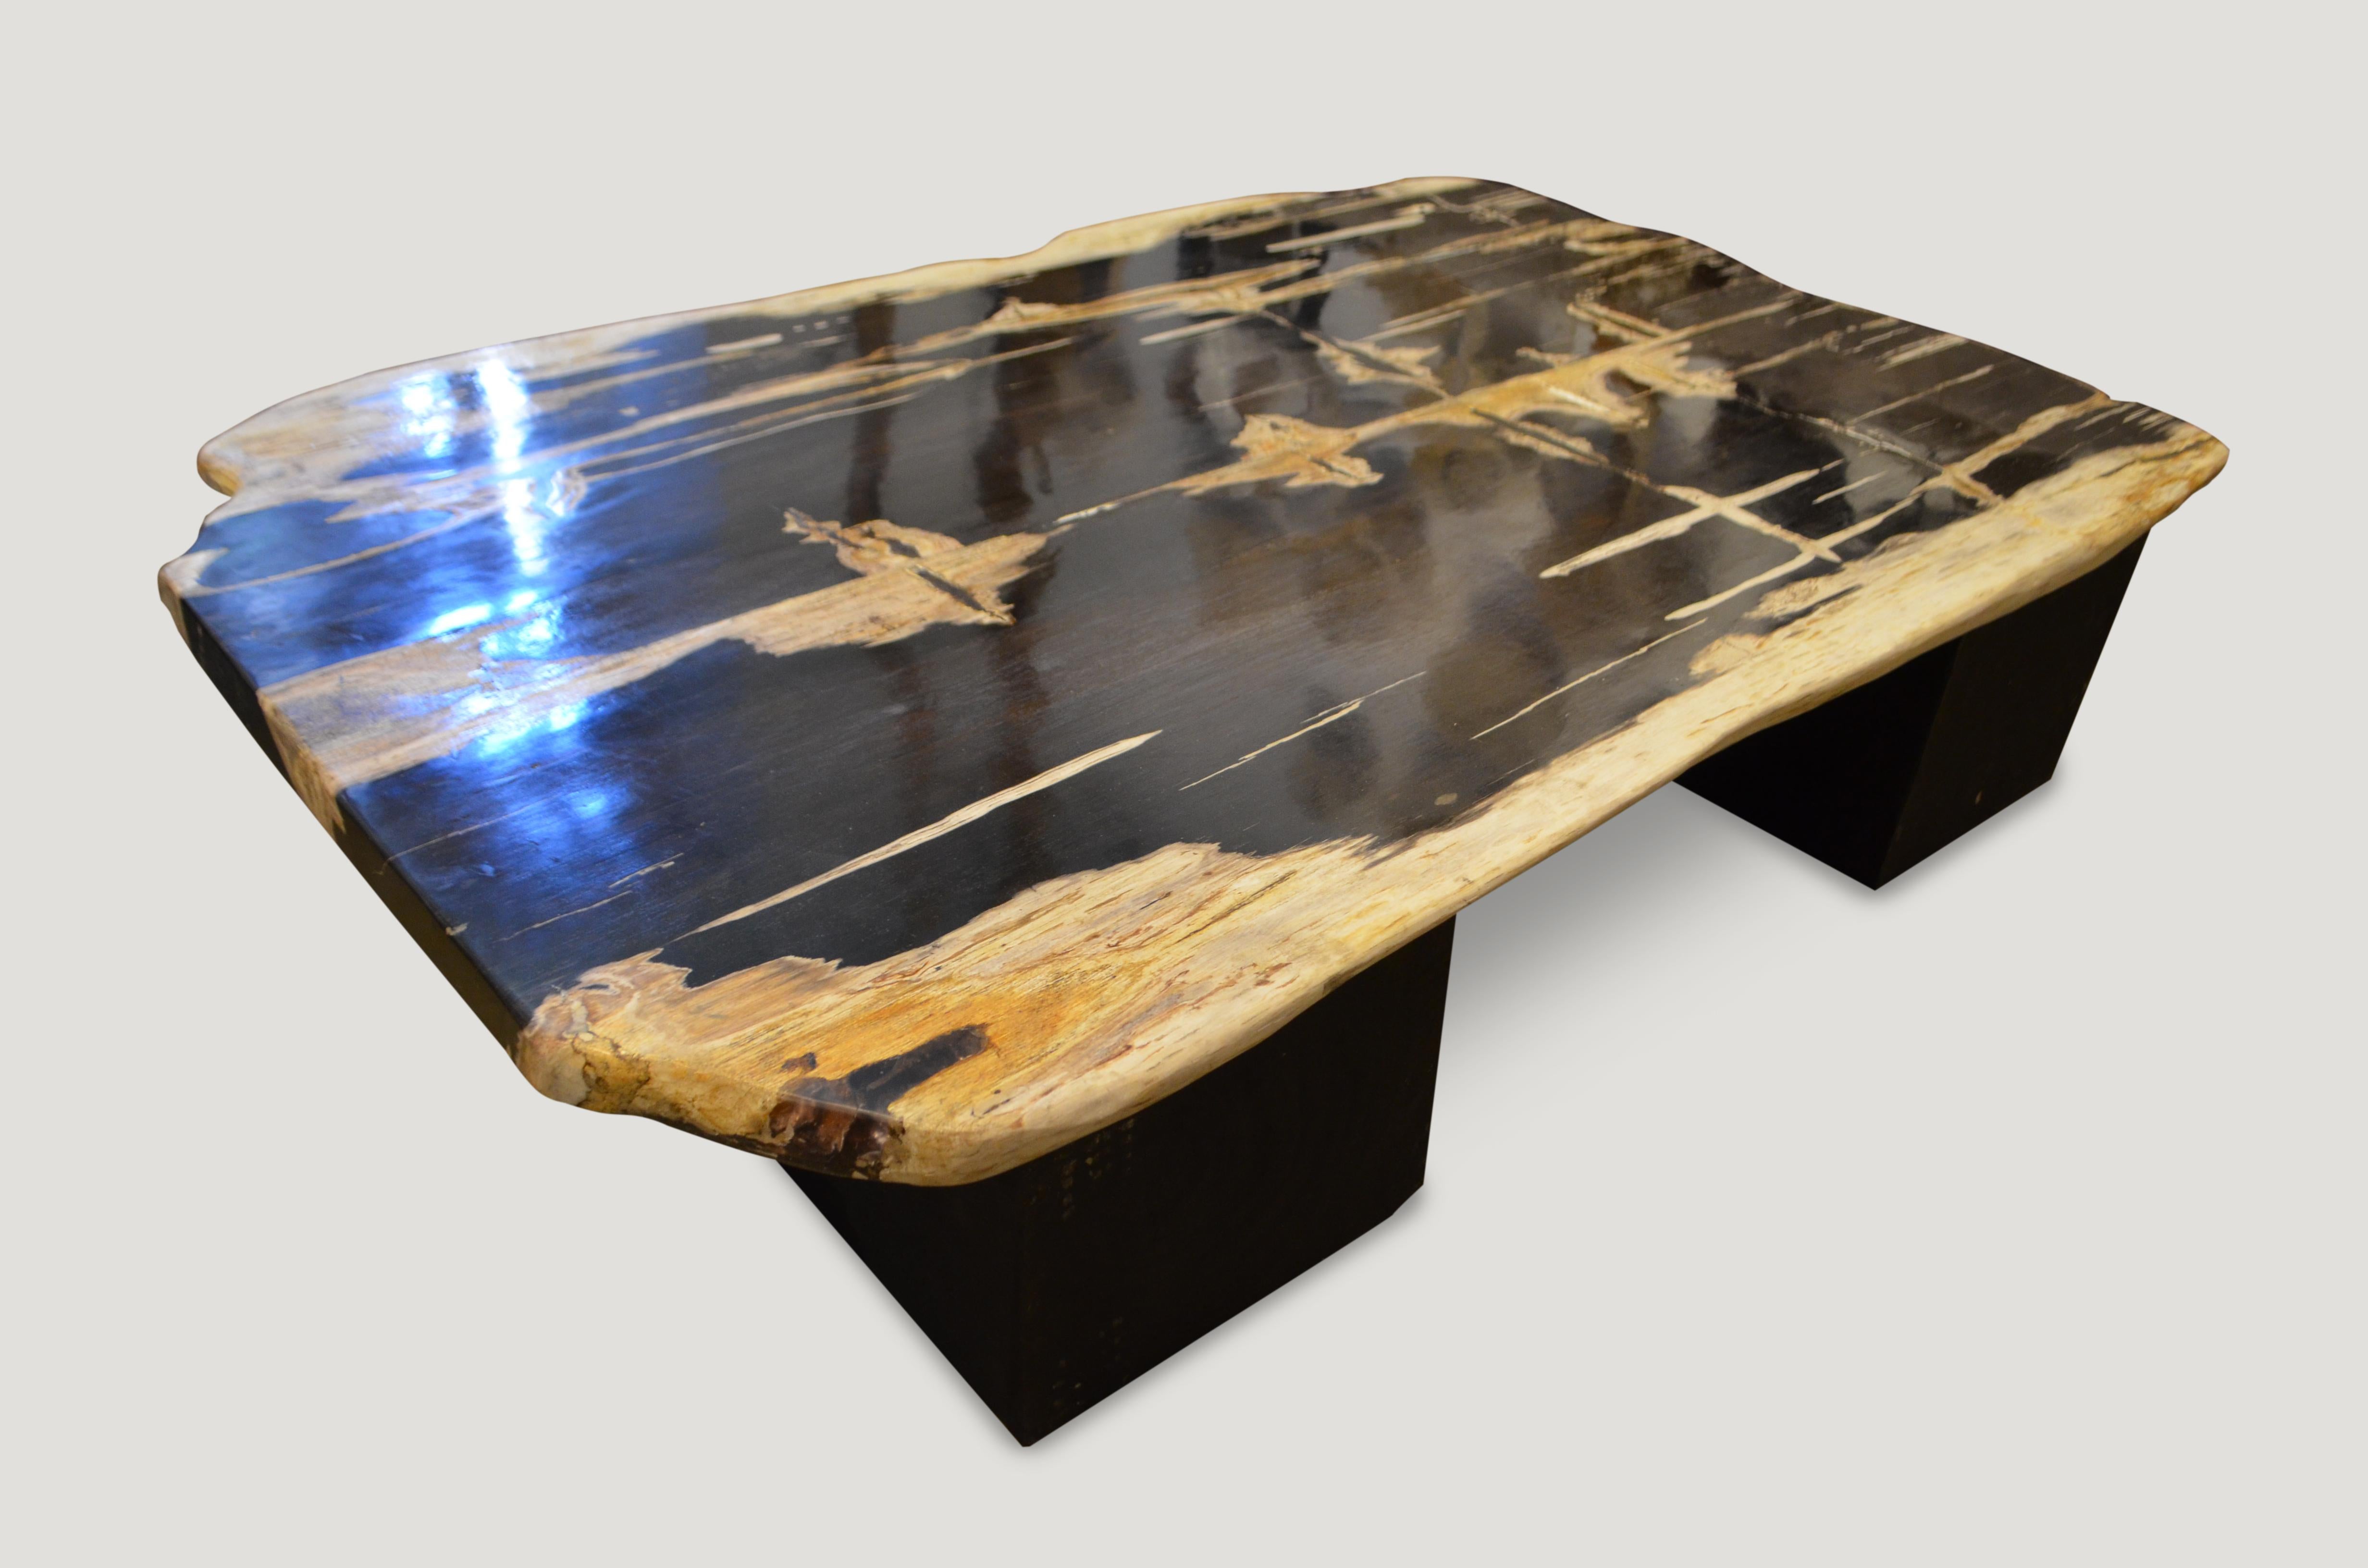 High quality super smooth petrified wood coffee table, dining table or counter top. Stunning black with contrasting natural tones make this an impressive piece for any space. This two inch thick slab is shown floating on two espresso stained wooden